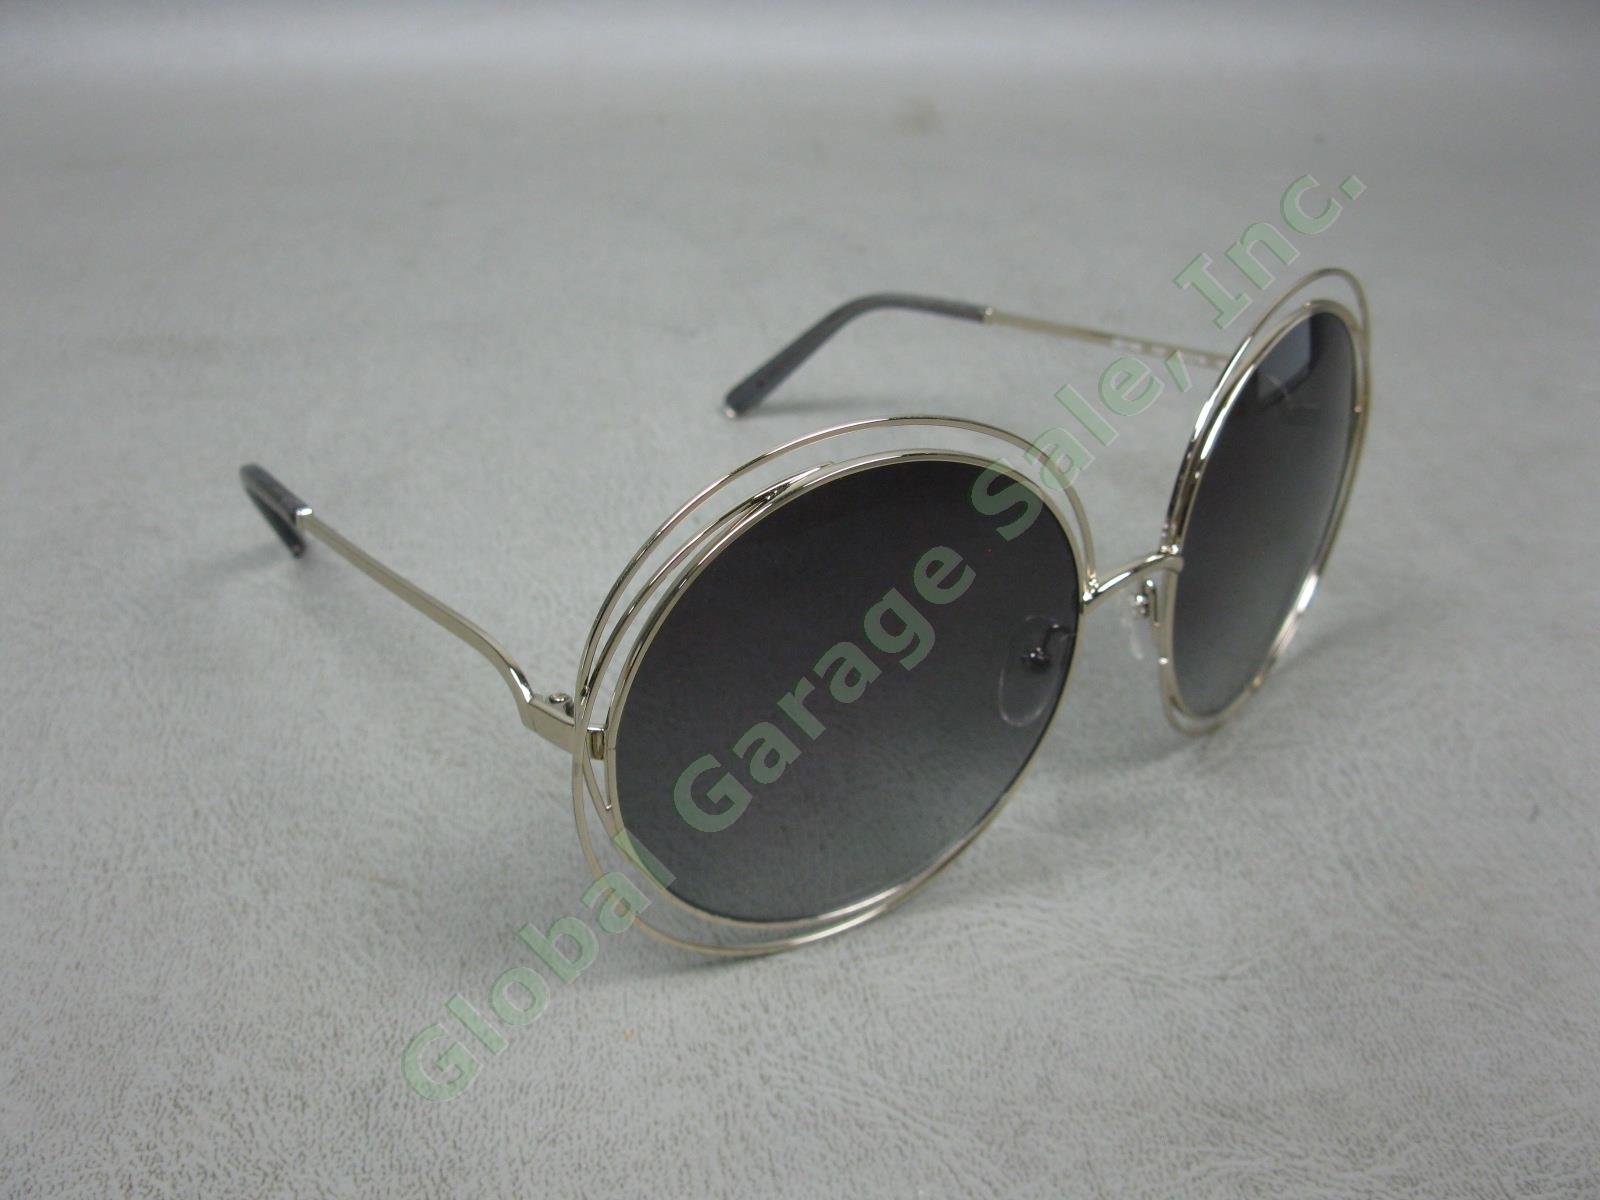 Chloe Carlina Gold Round Oversized Wire Frame Sunglasses CE114S 737 62 18 135 NR 2